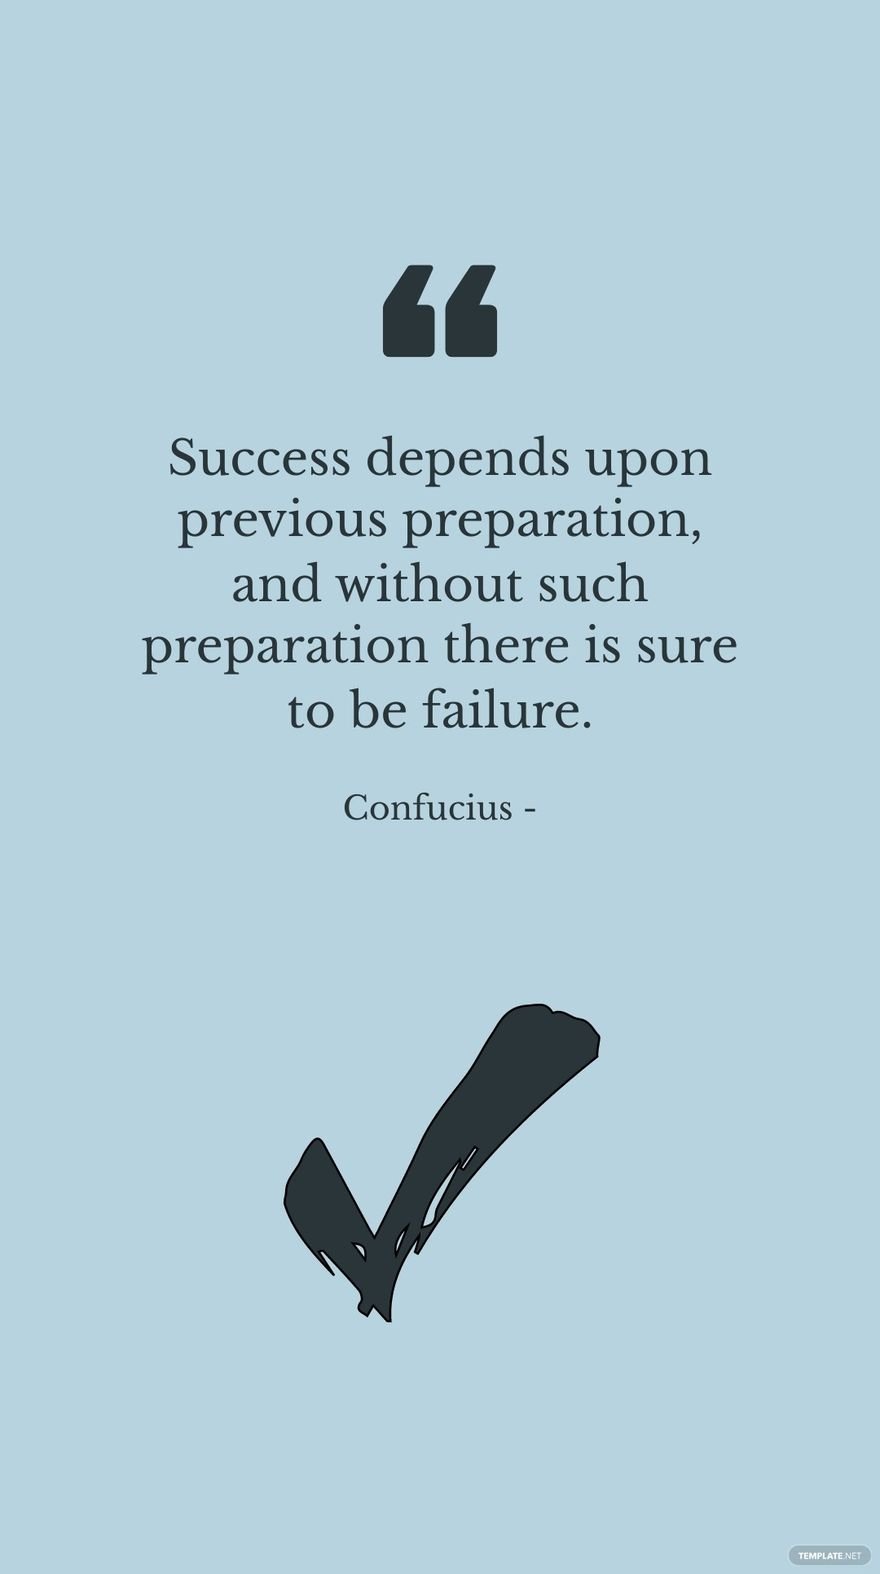 Confucius - Success depends upon previous preparation, and without such preparation there is sure to be failure.